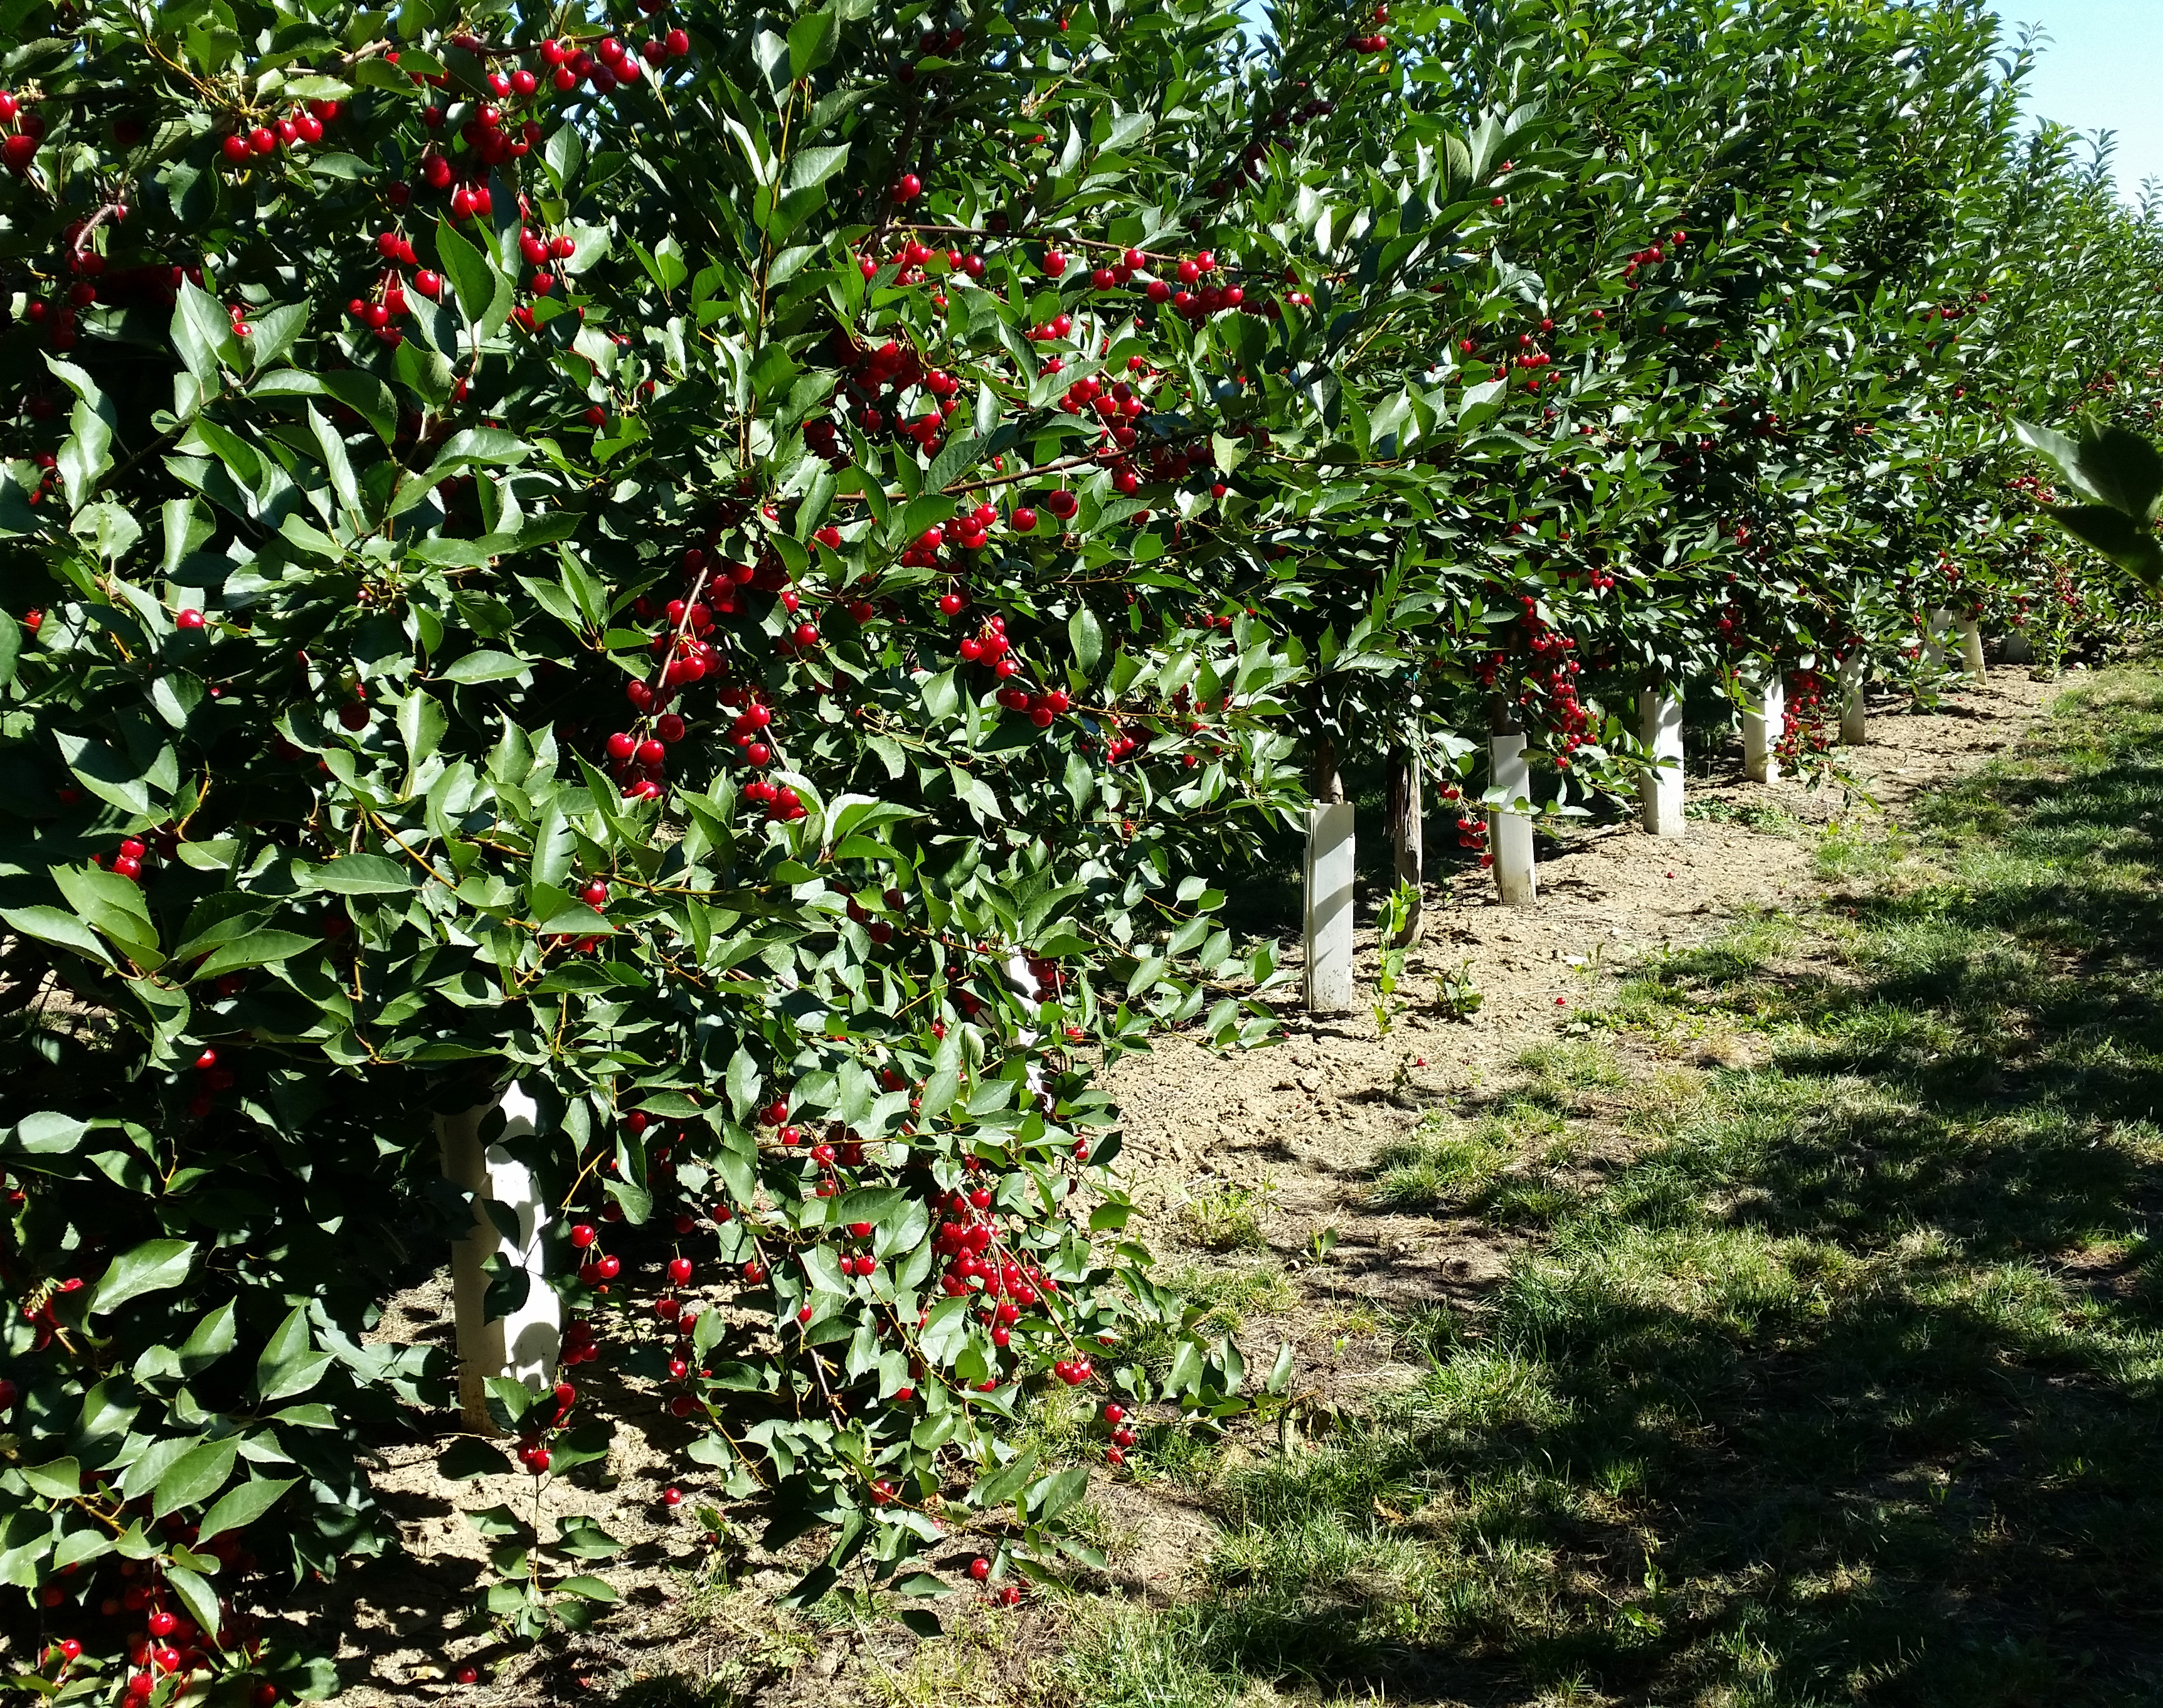 Adara was the best of seven rootstocks on sour cherries in Serbia